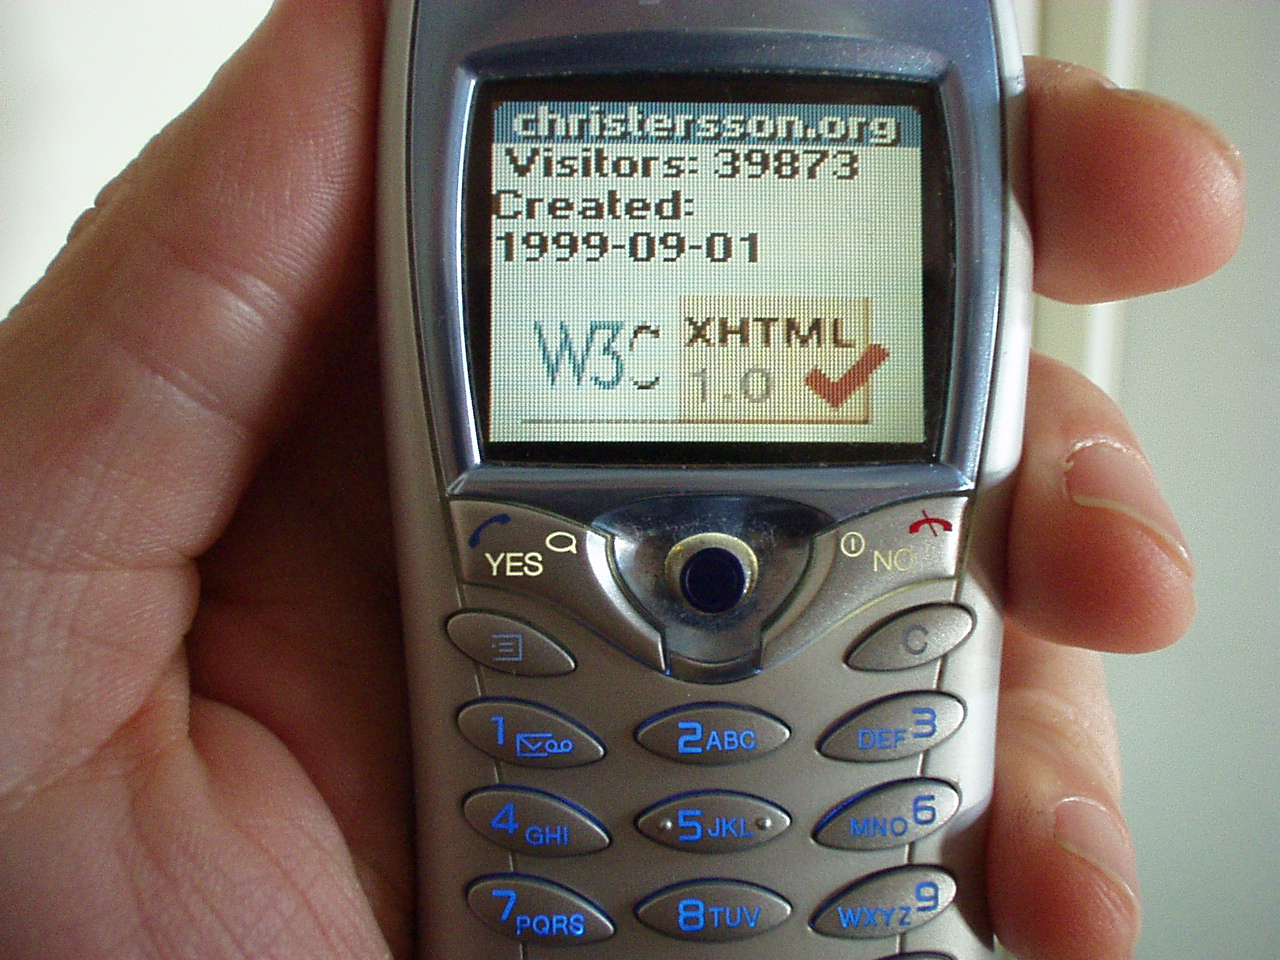 An XHTML site from 1999 viewed on a mobile phone